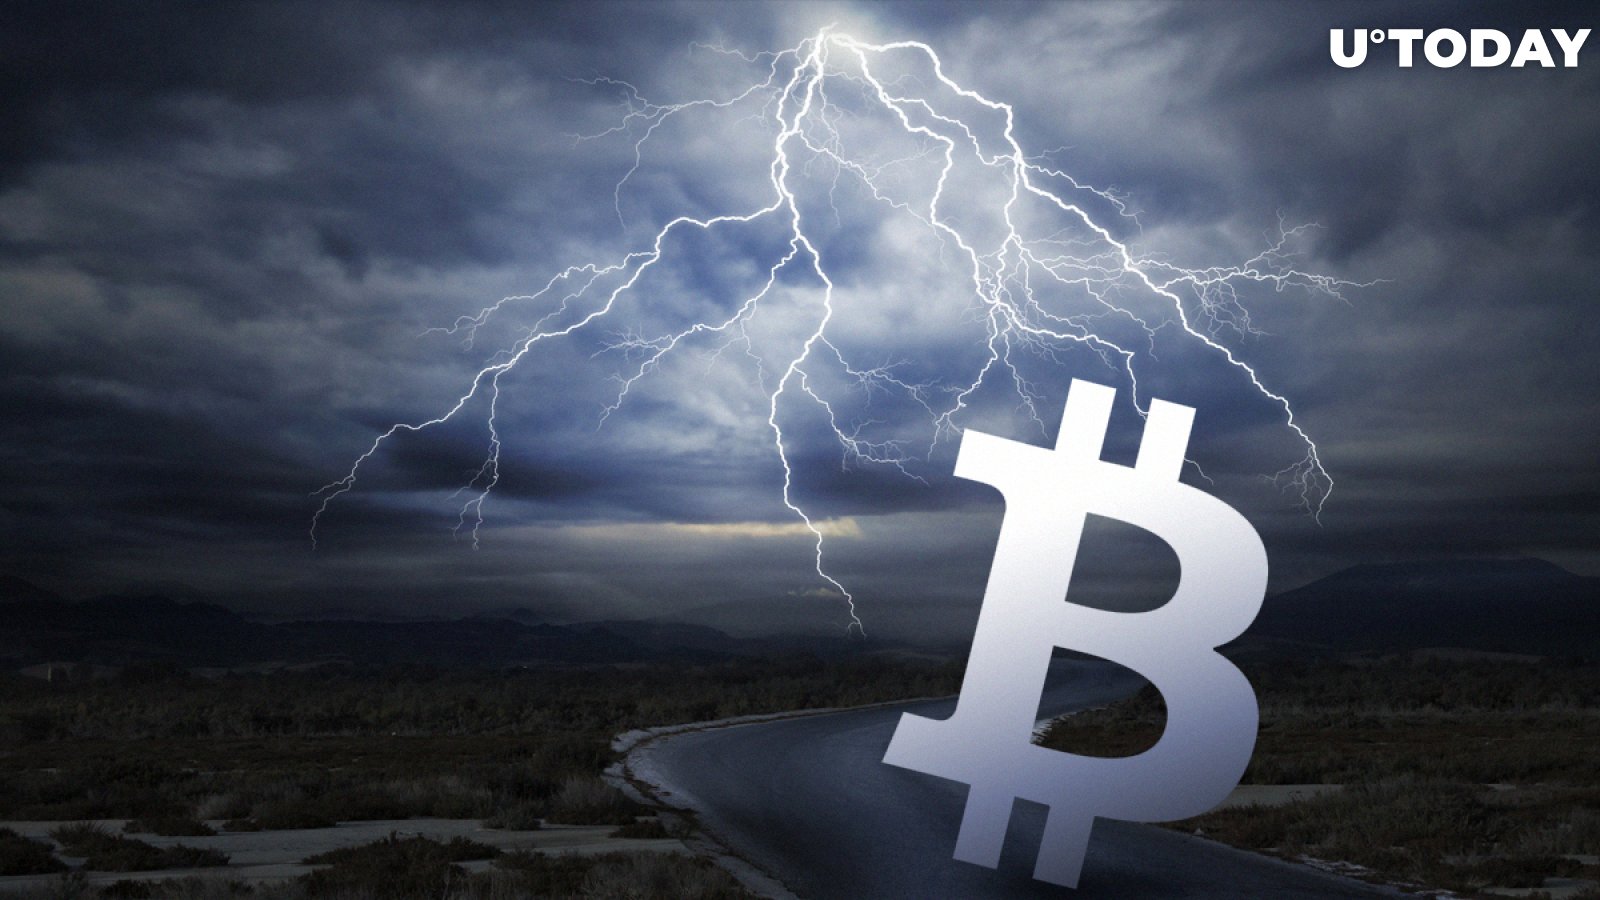 Bitcoin Twitter Mentions Hit Lowest Point in Four Years. Does It Matter?